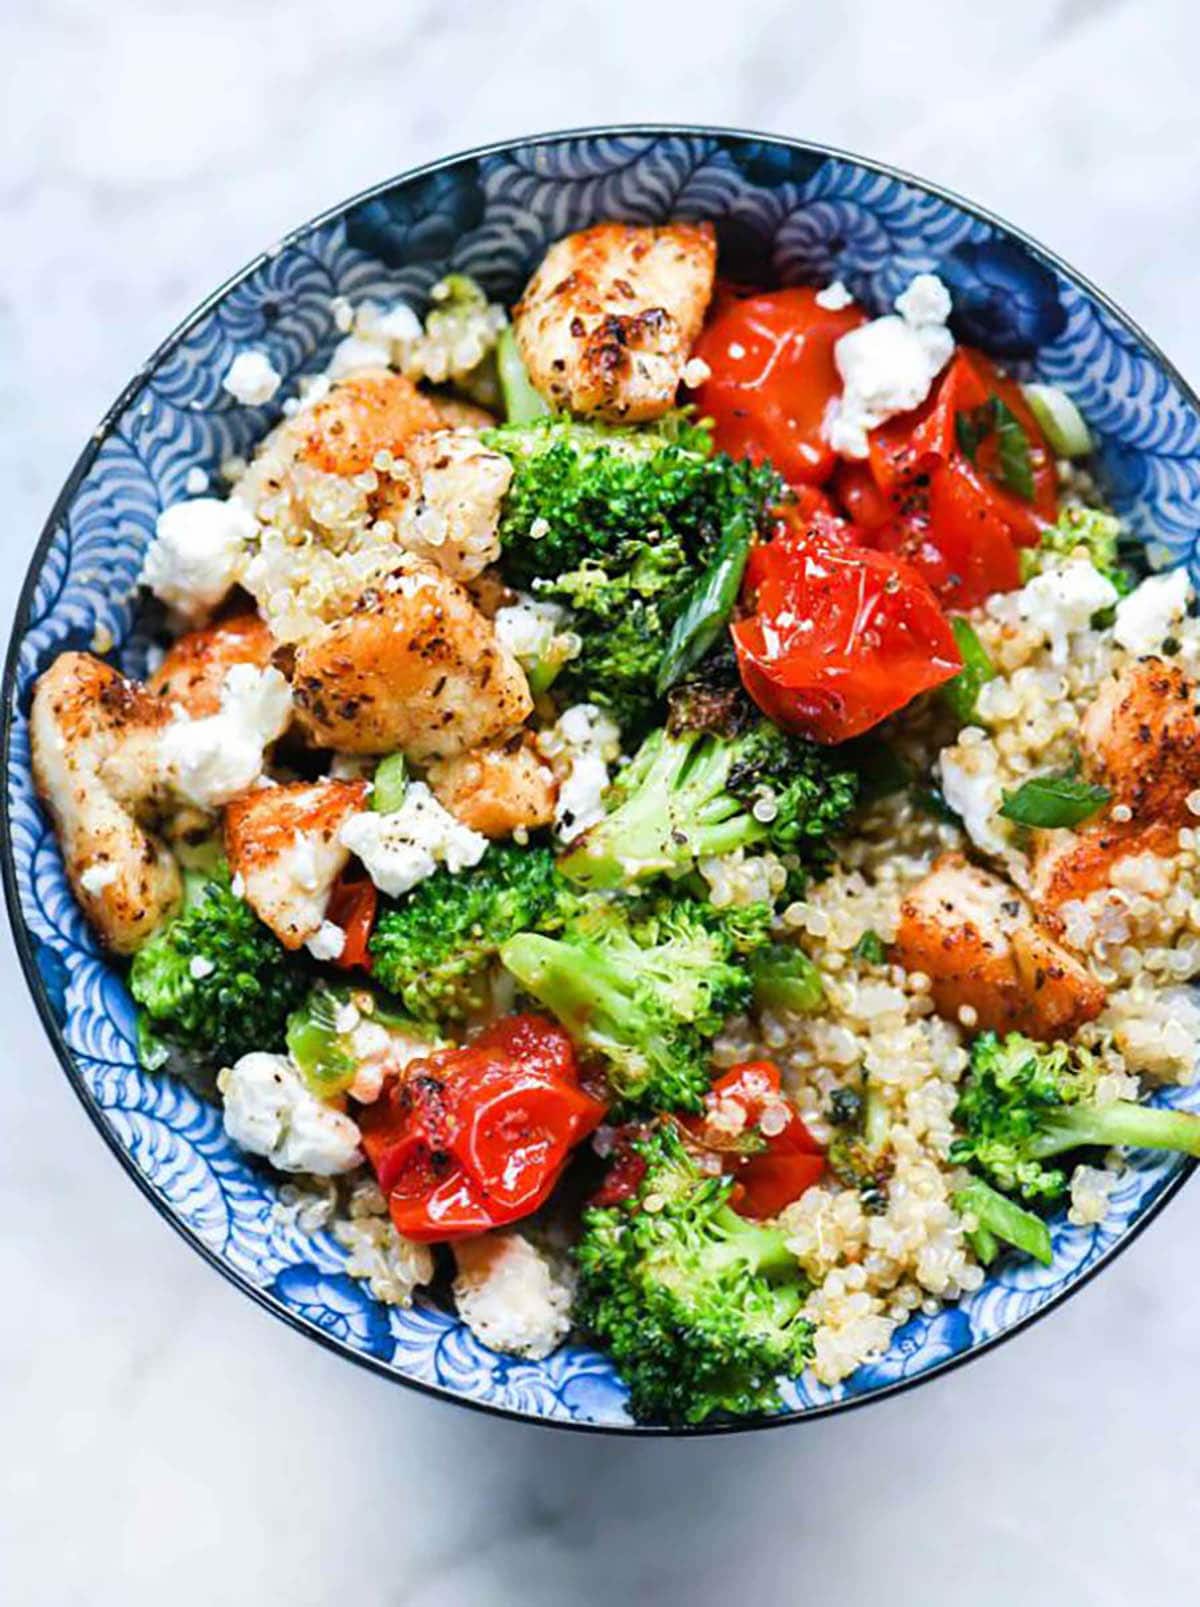 Chicken and Quinoa Bowl with broccoli and tomatoes